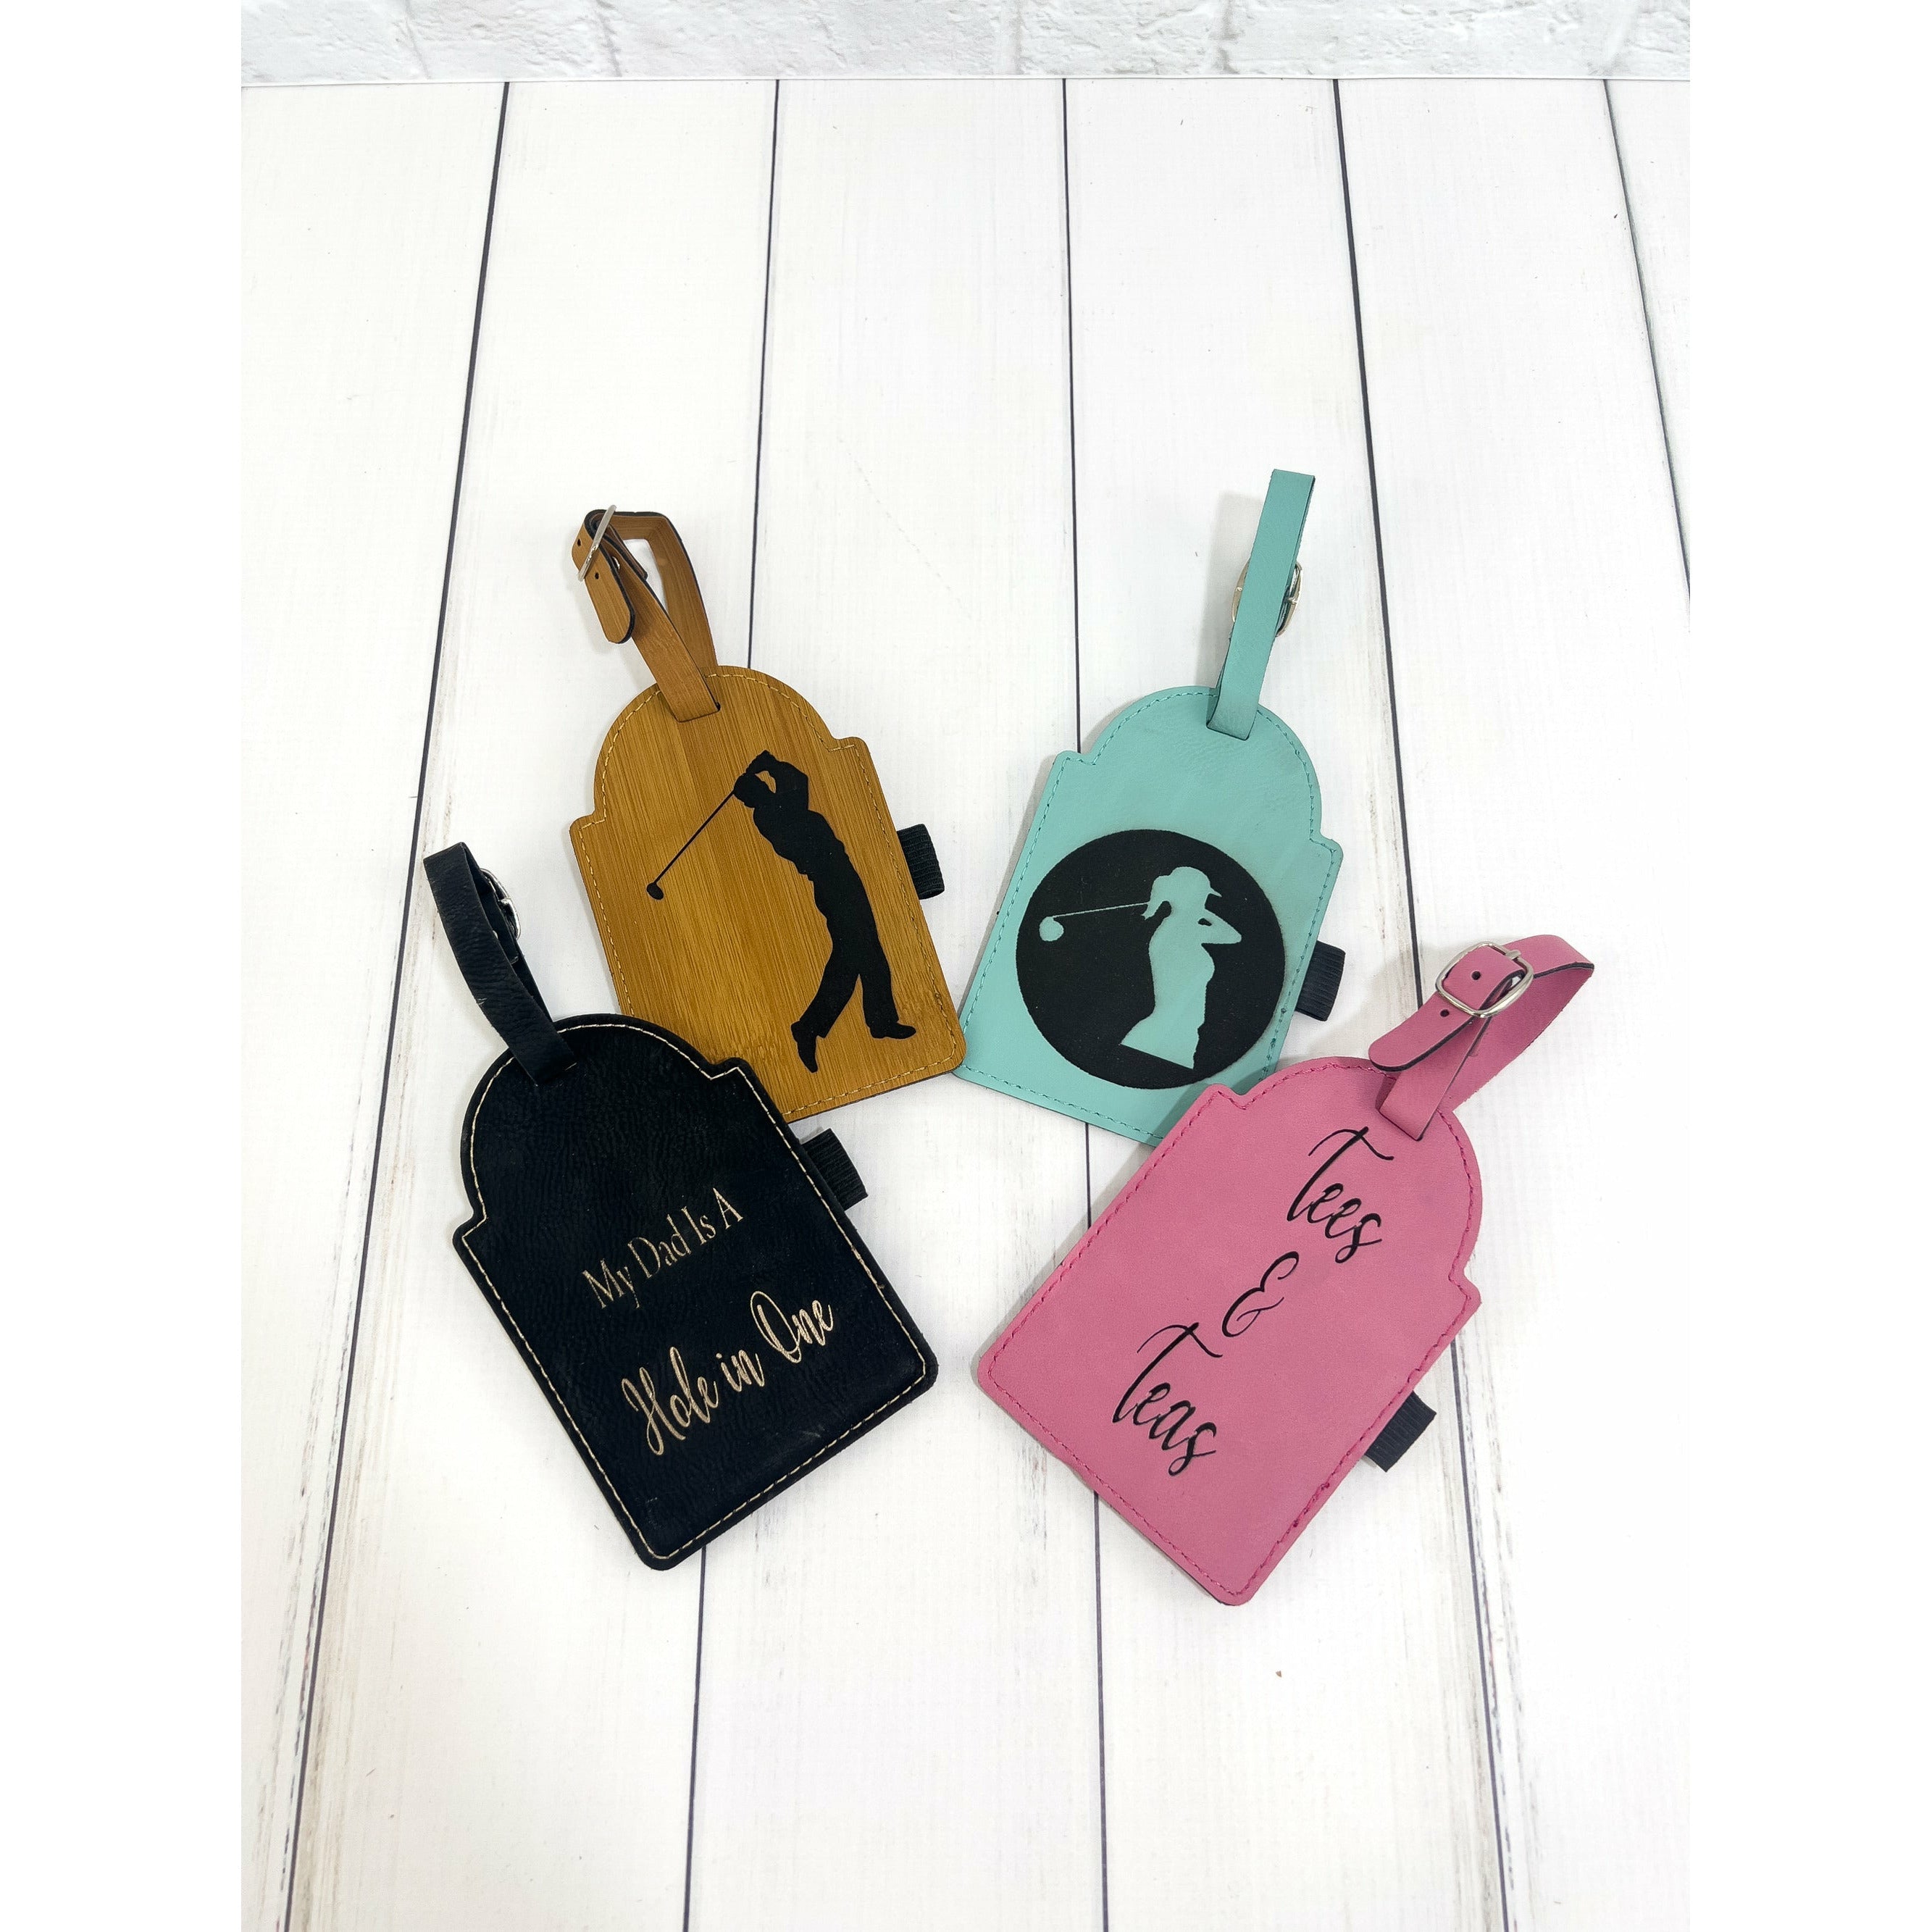 Golf Gifts | Personalized Golf Bag Tags - Black